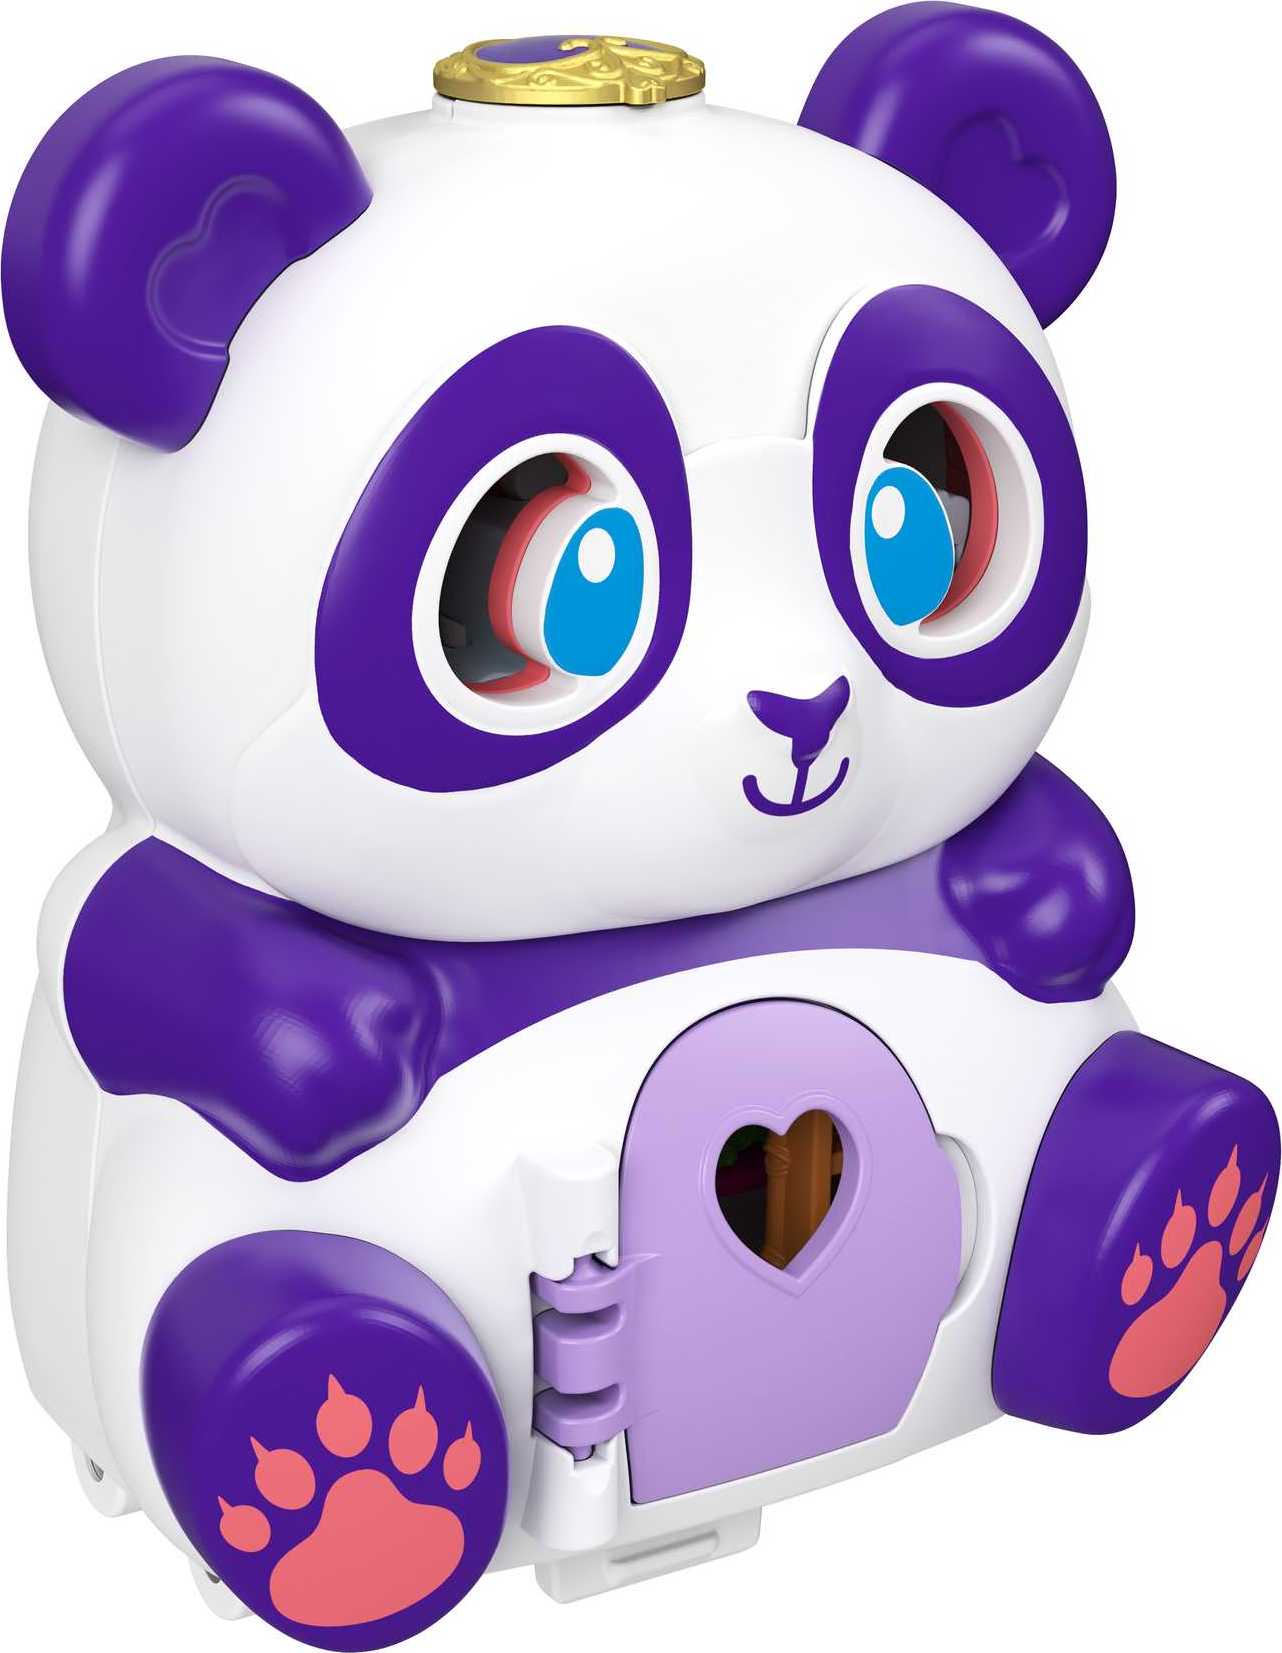 Polly Pocket Flip & Find Panda Compact, Micro Doll, Pet & Accessories, Travel Toy with Flip Bottom - image 5 of 7